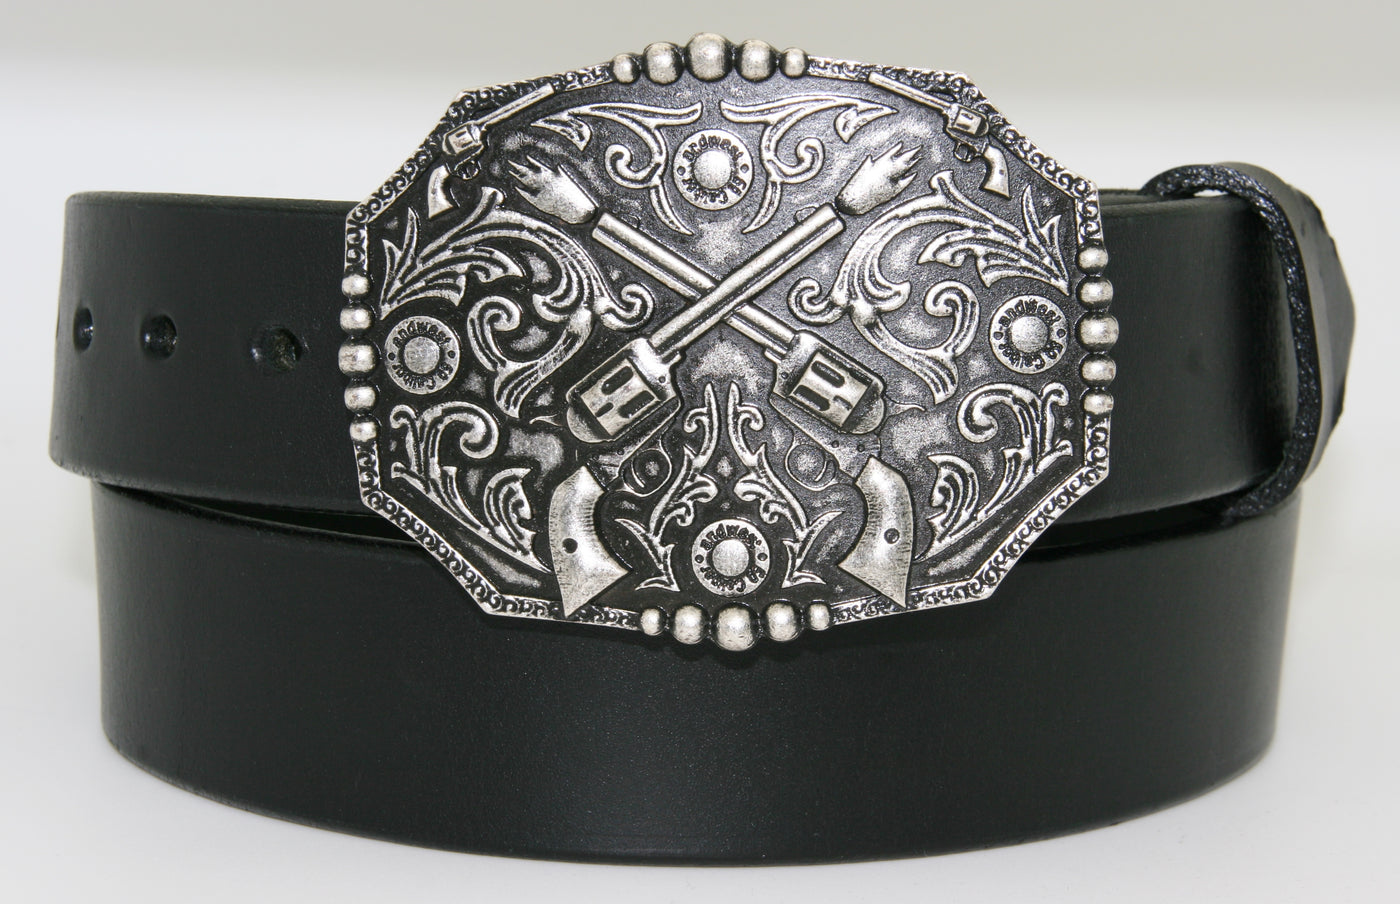 Crossed pistols buckle pictured on black belt-This antique silver colored buckle by AndWest features a pair of crossed pistols centered on the oval shaped buckle with flattened sides. It also features 50 caliber shell end replicas within the Western scroll background design.  Fits belts up to 1 1/2" wide, dimensions are 3" tall by 4" wide.  Available in our online store as well as the retail shop in Smyrna, TN, just outside of Nashville.  This buckle is made in Mexico.